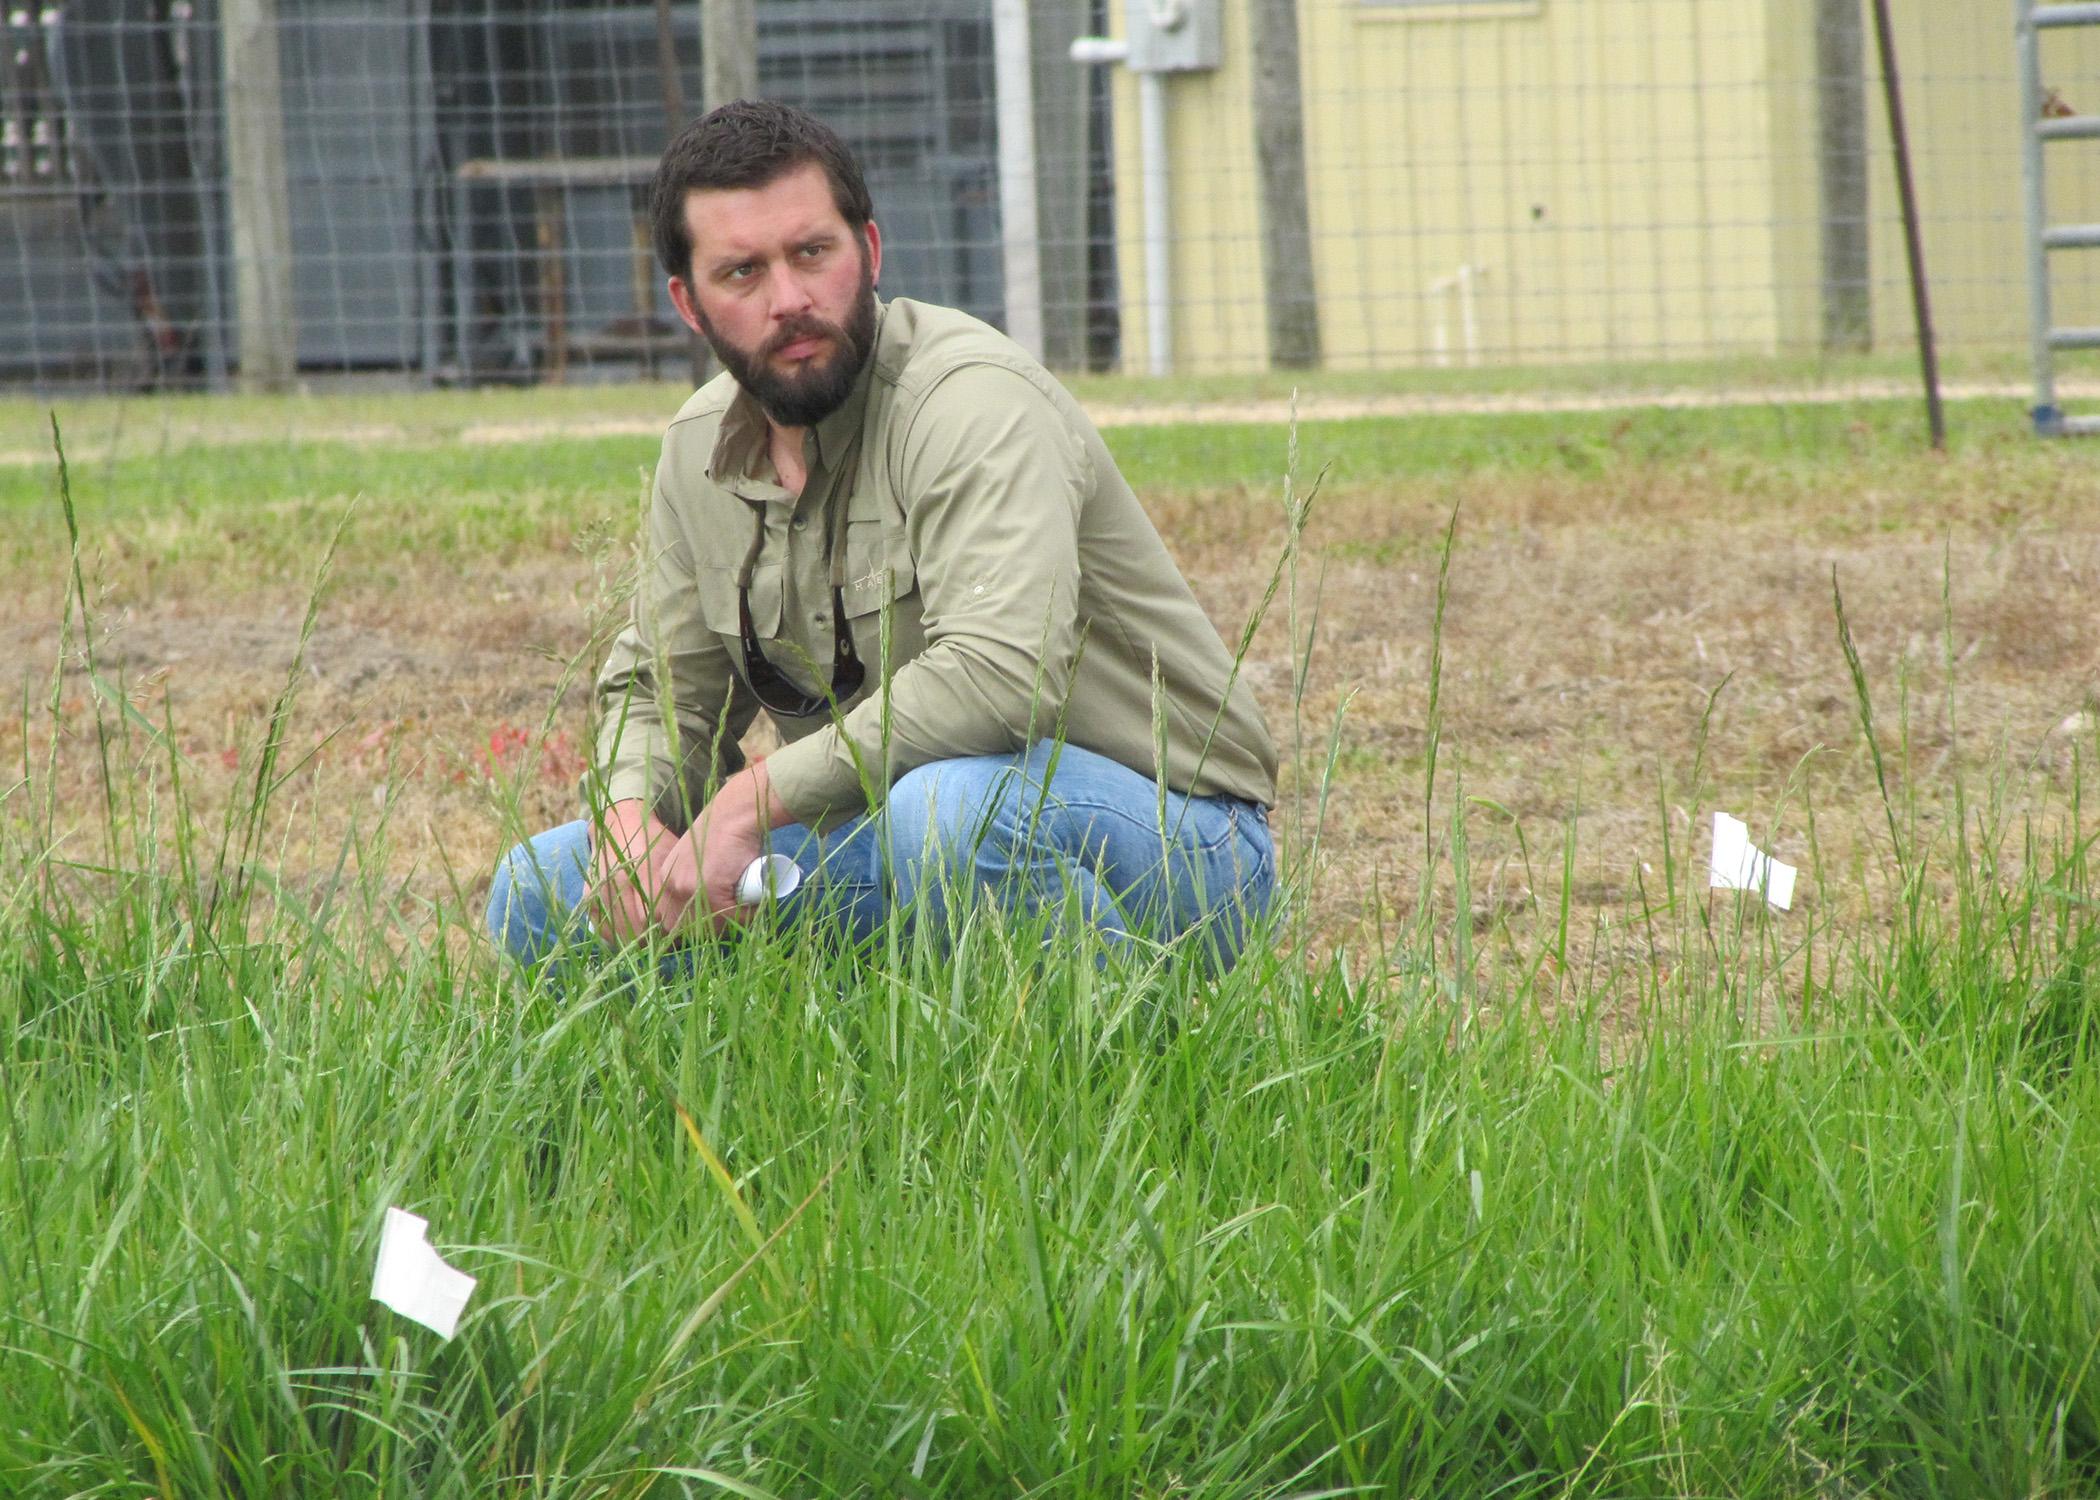 Jesse Morrison, Mississippi State University doctoral student and research associate, looks over a plot of eastern gamagrass. He joined an elite group of graduate students and scientists from around the country taking part in a program to raise awareness and support in Congress for science and research funding. (Submitted photo)